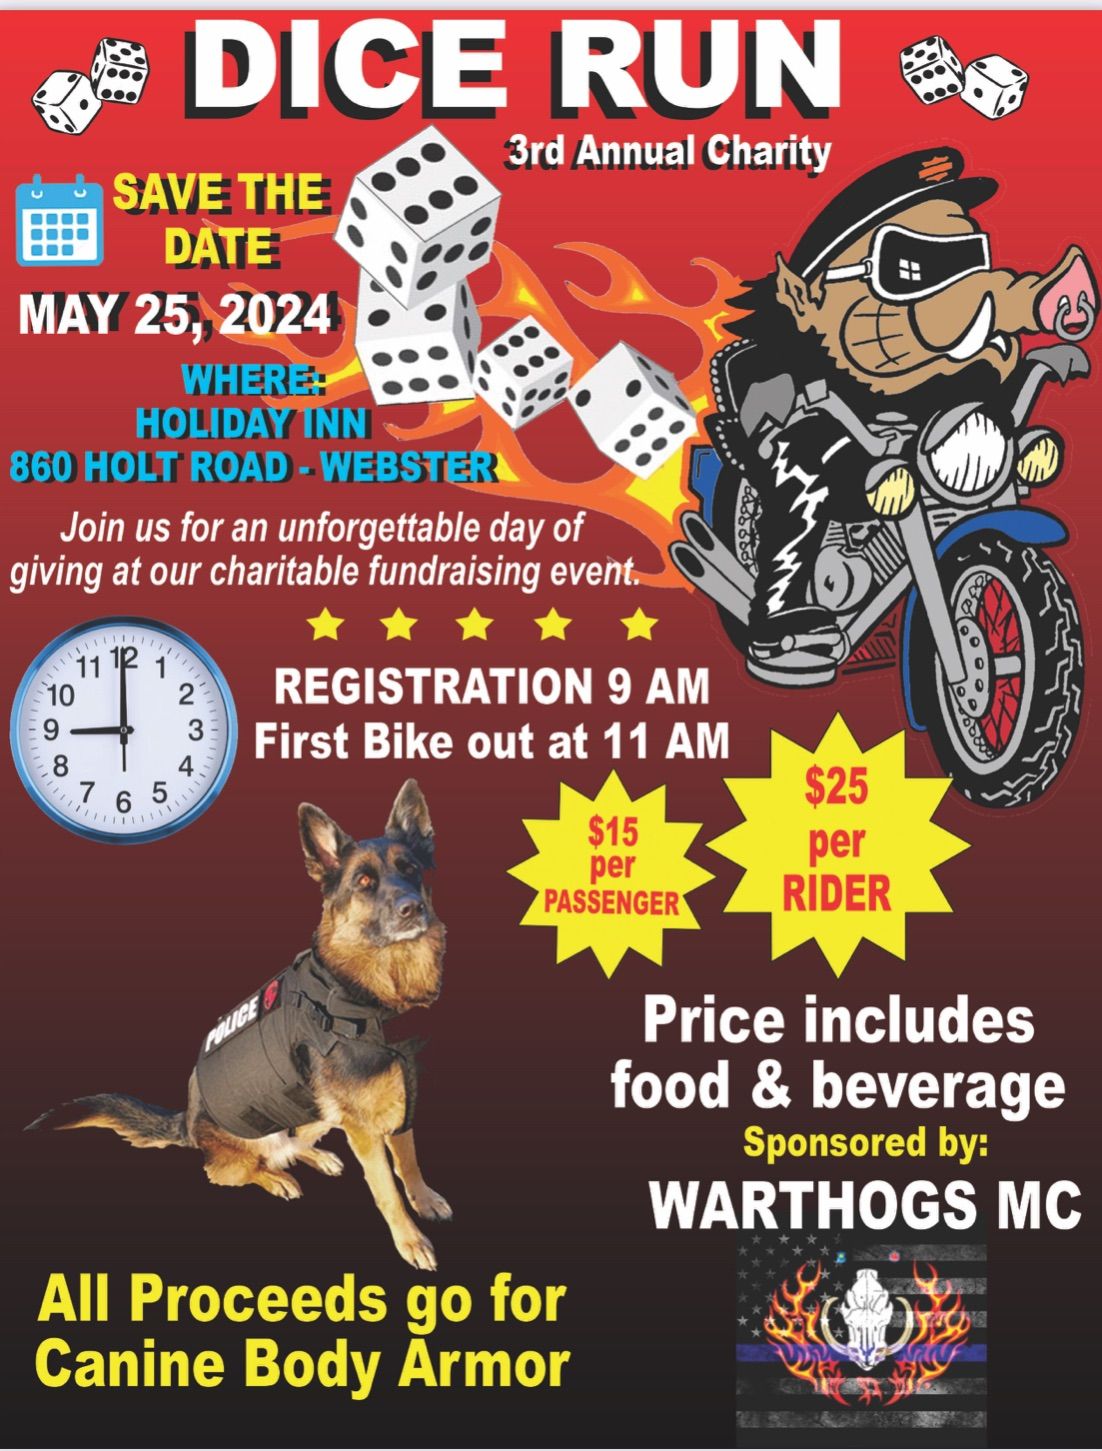 Rochester Warthogs 3rd annual charity event -Dice run